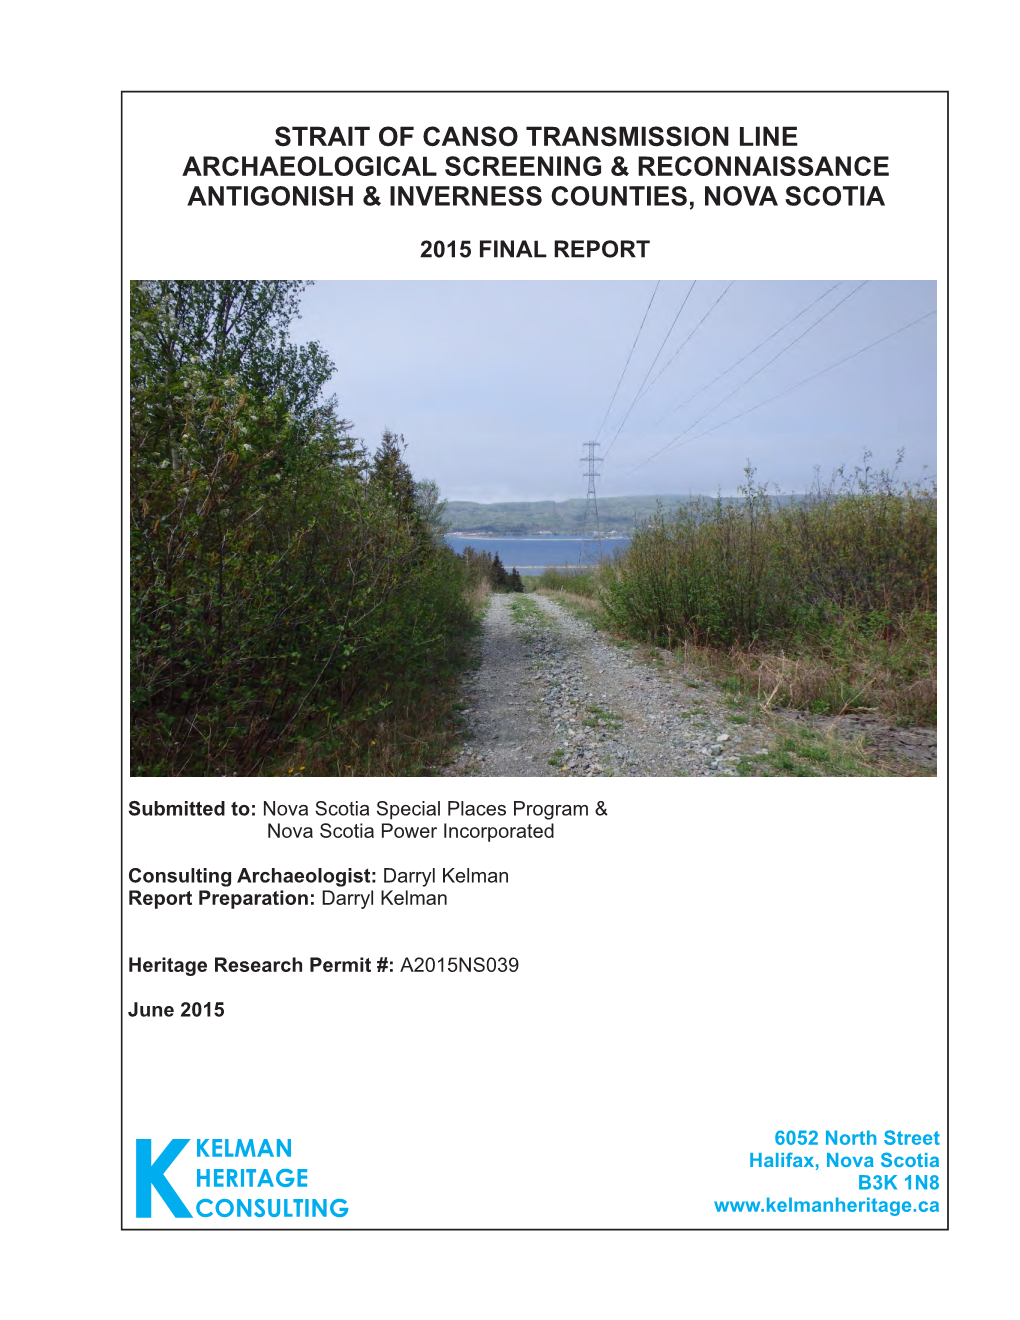 Strait of Canso Transmission Line Archaeological Screening & Reconnaissance Antigonish & Inverness Counties, Nova Scotia